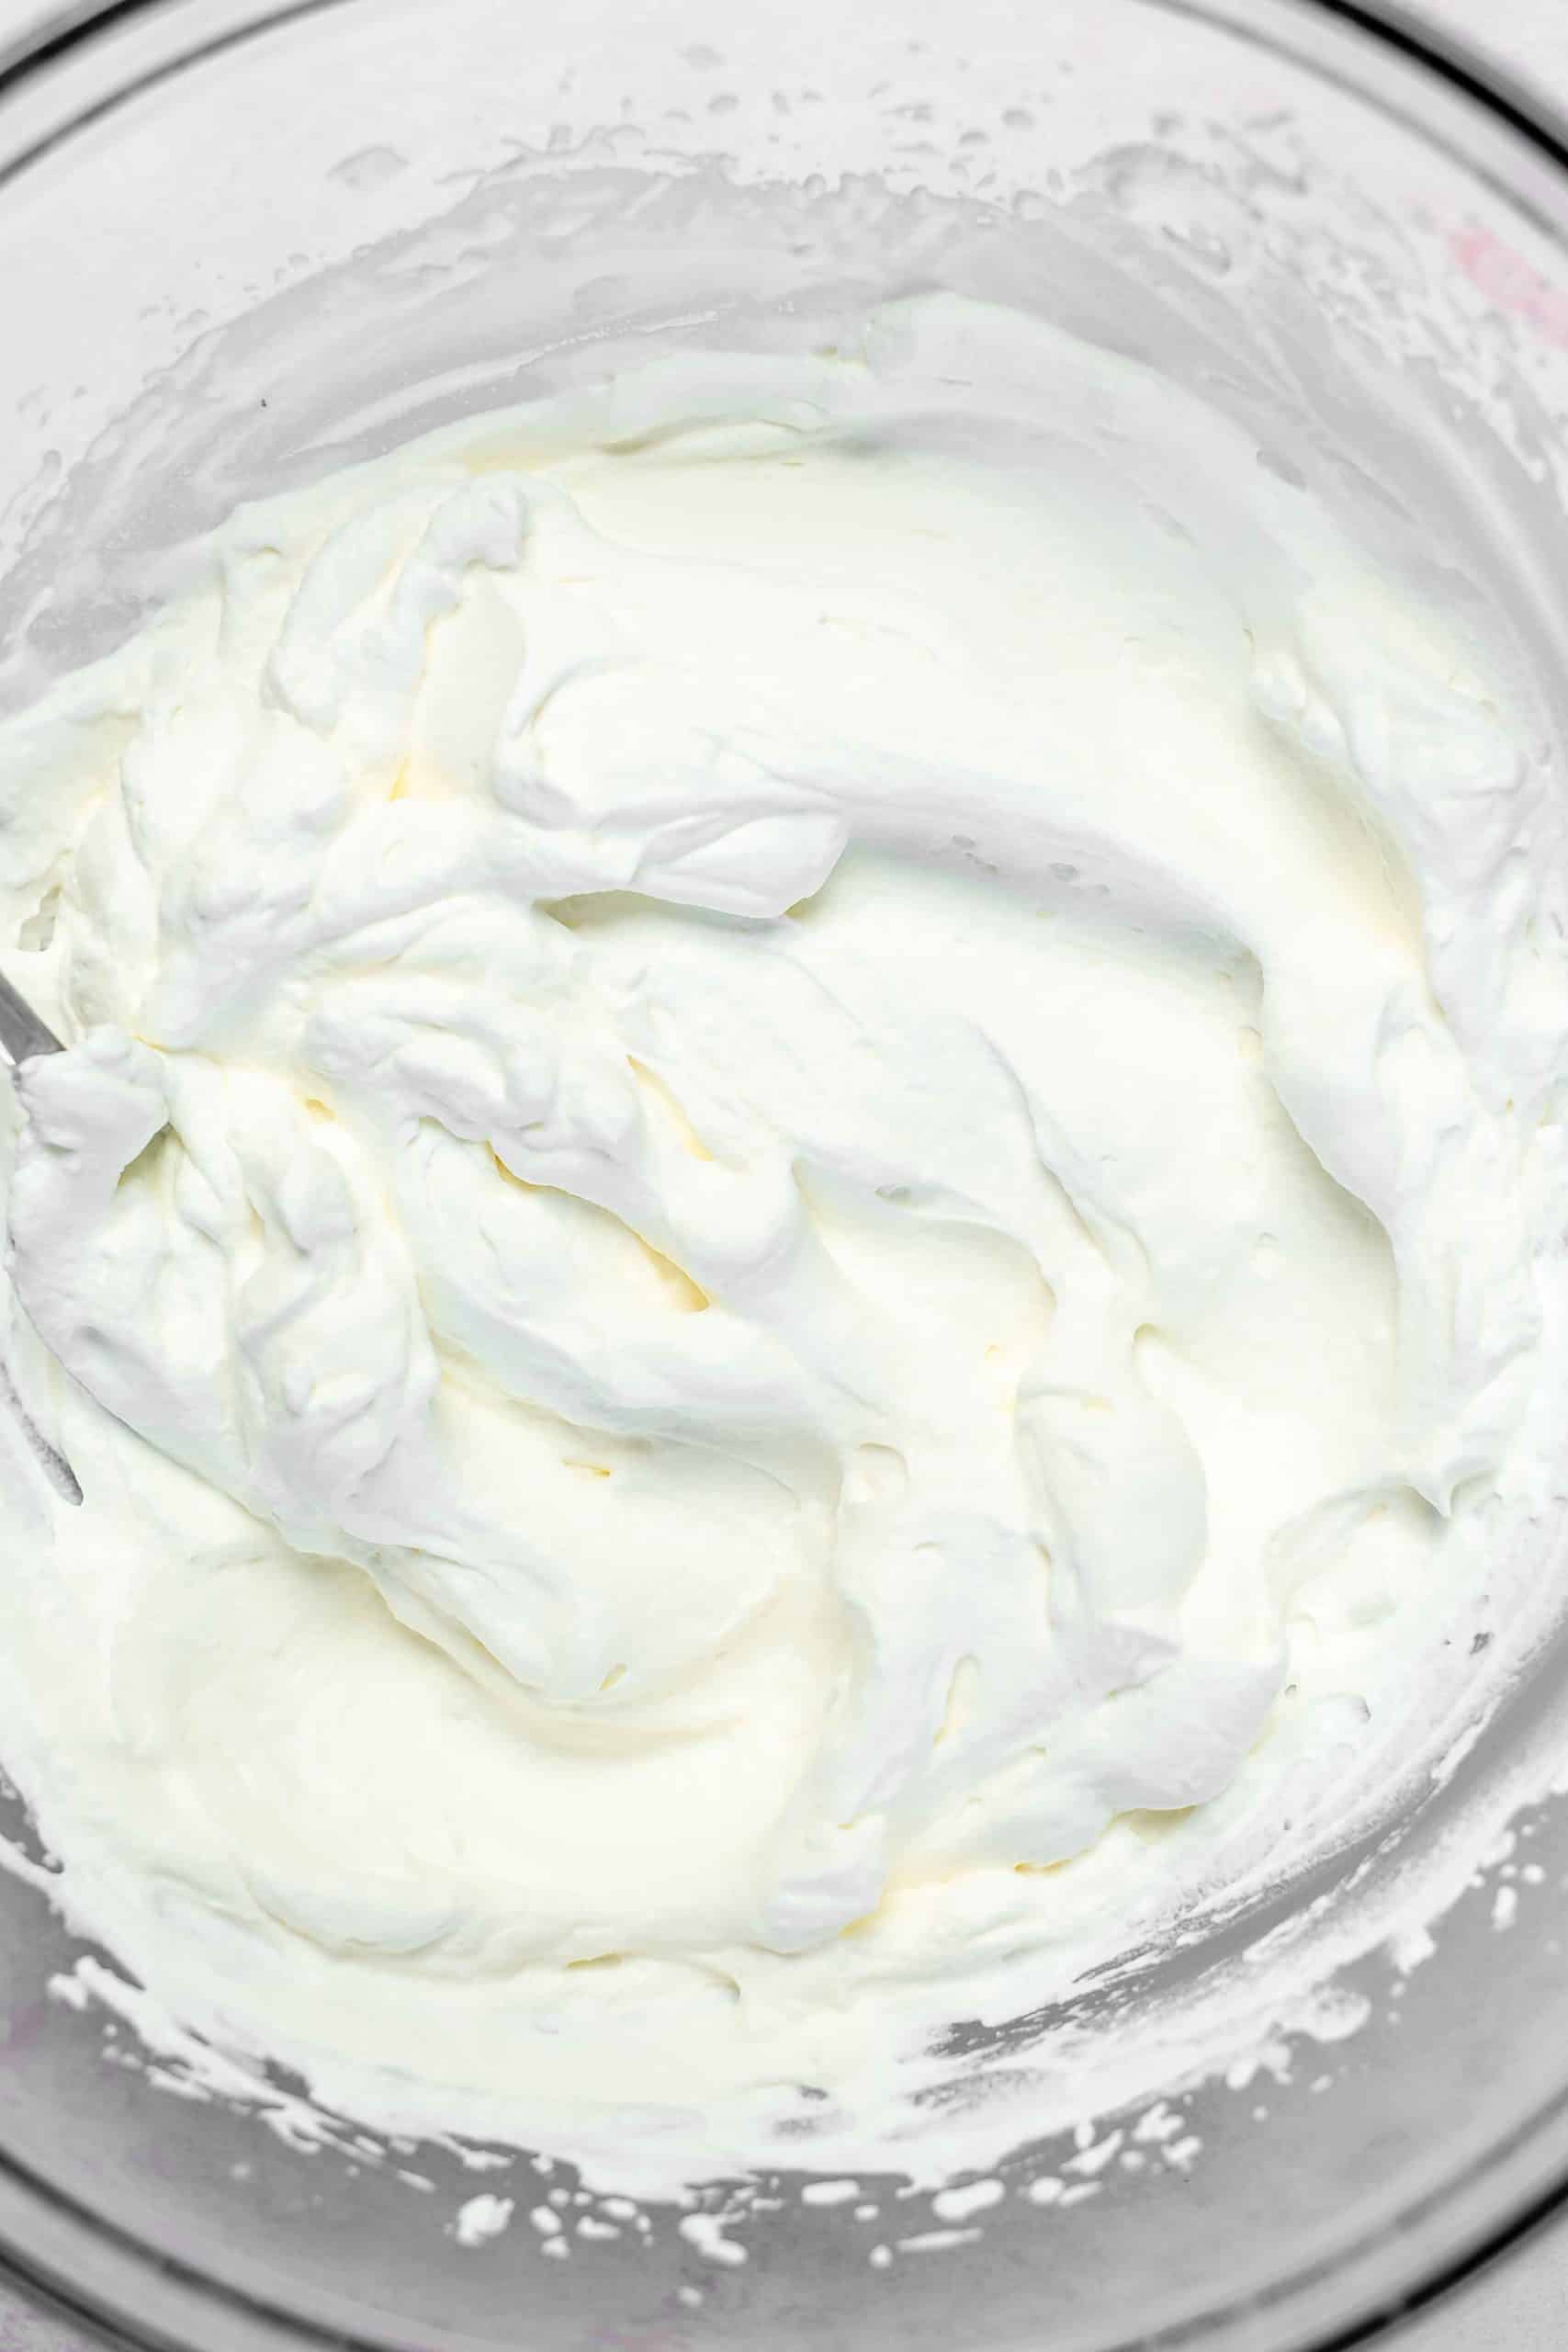 whipped cream in a glass bowl